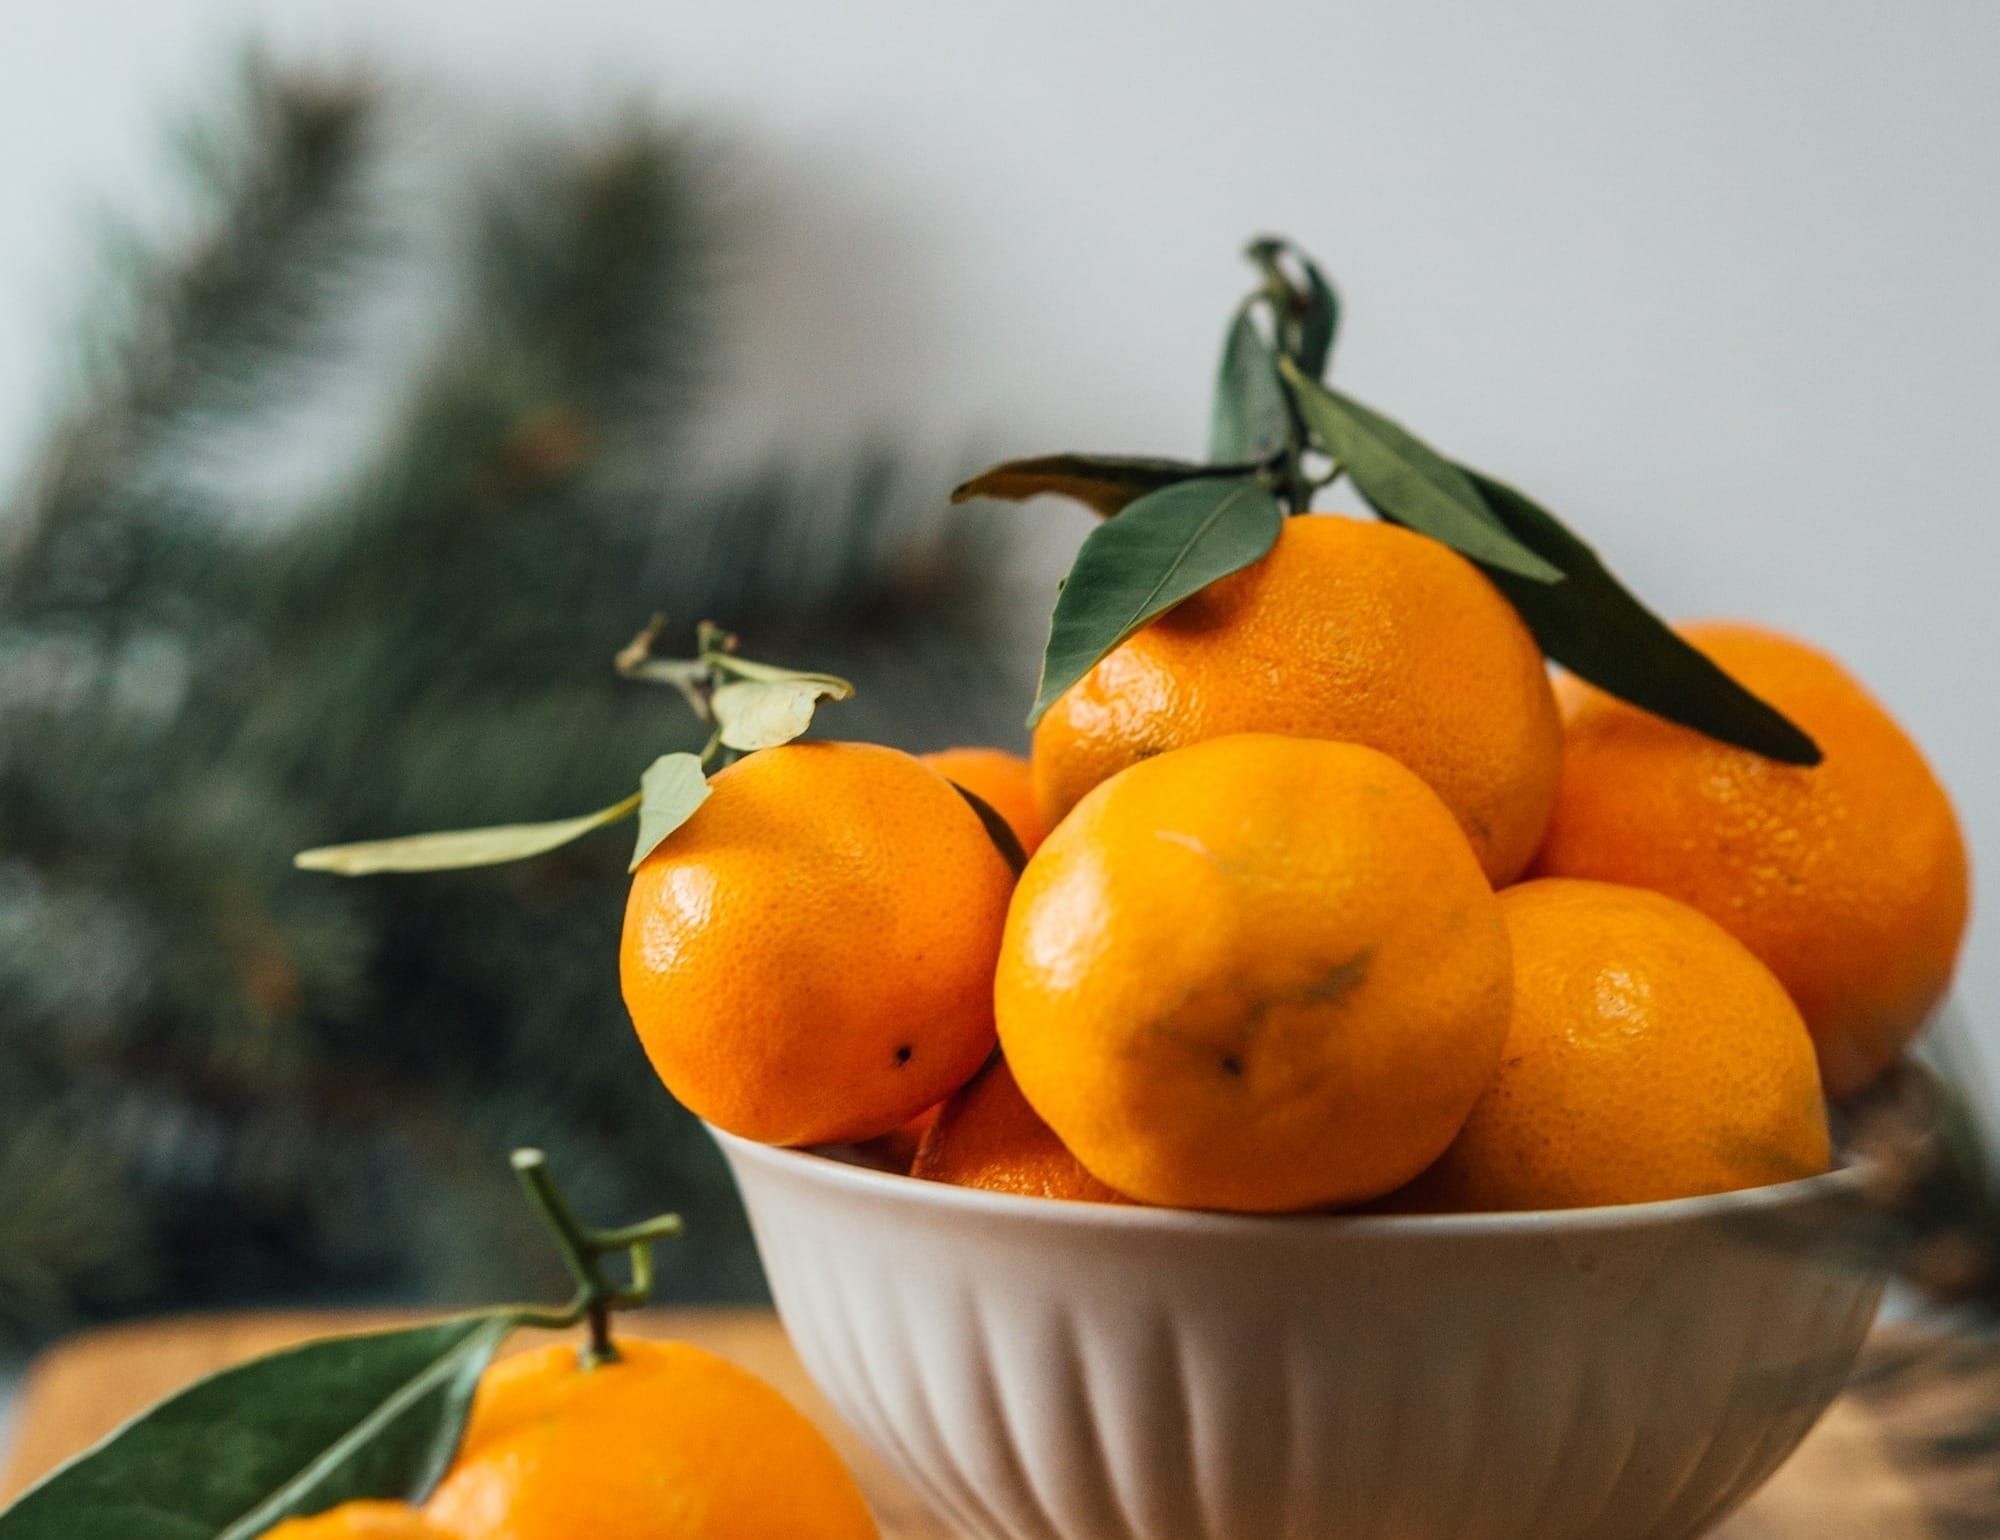 Guide: Can Dogs Safely Eat Clementines and Citrus?